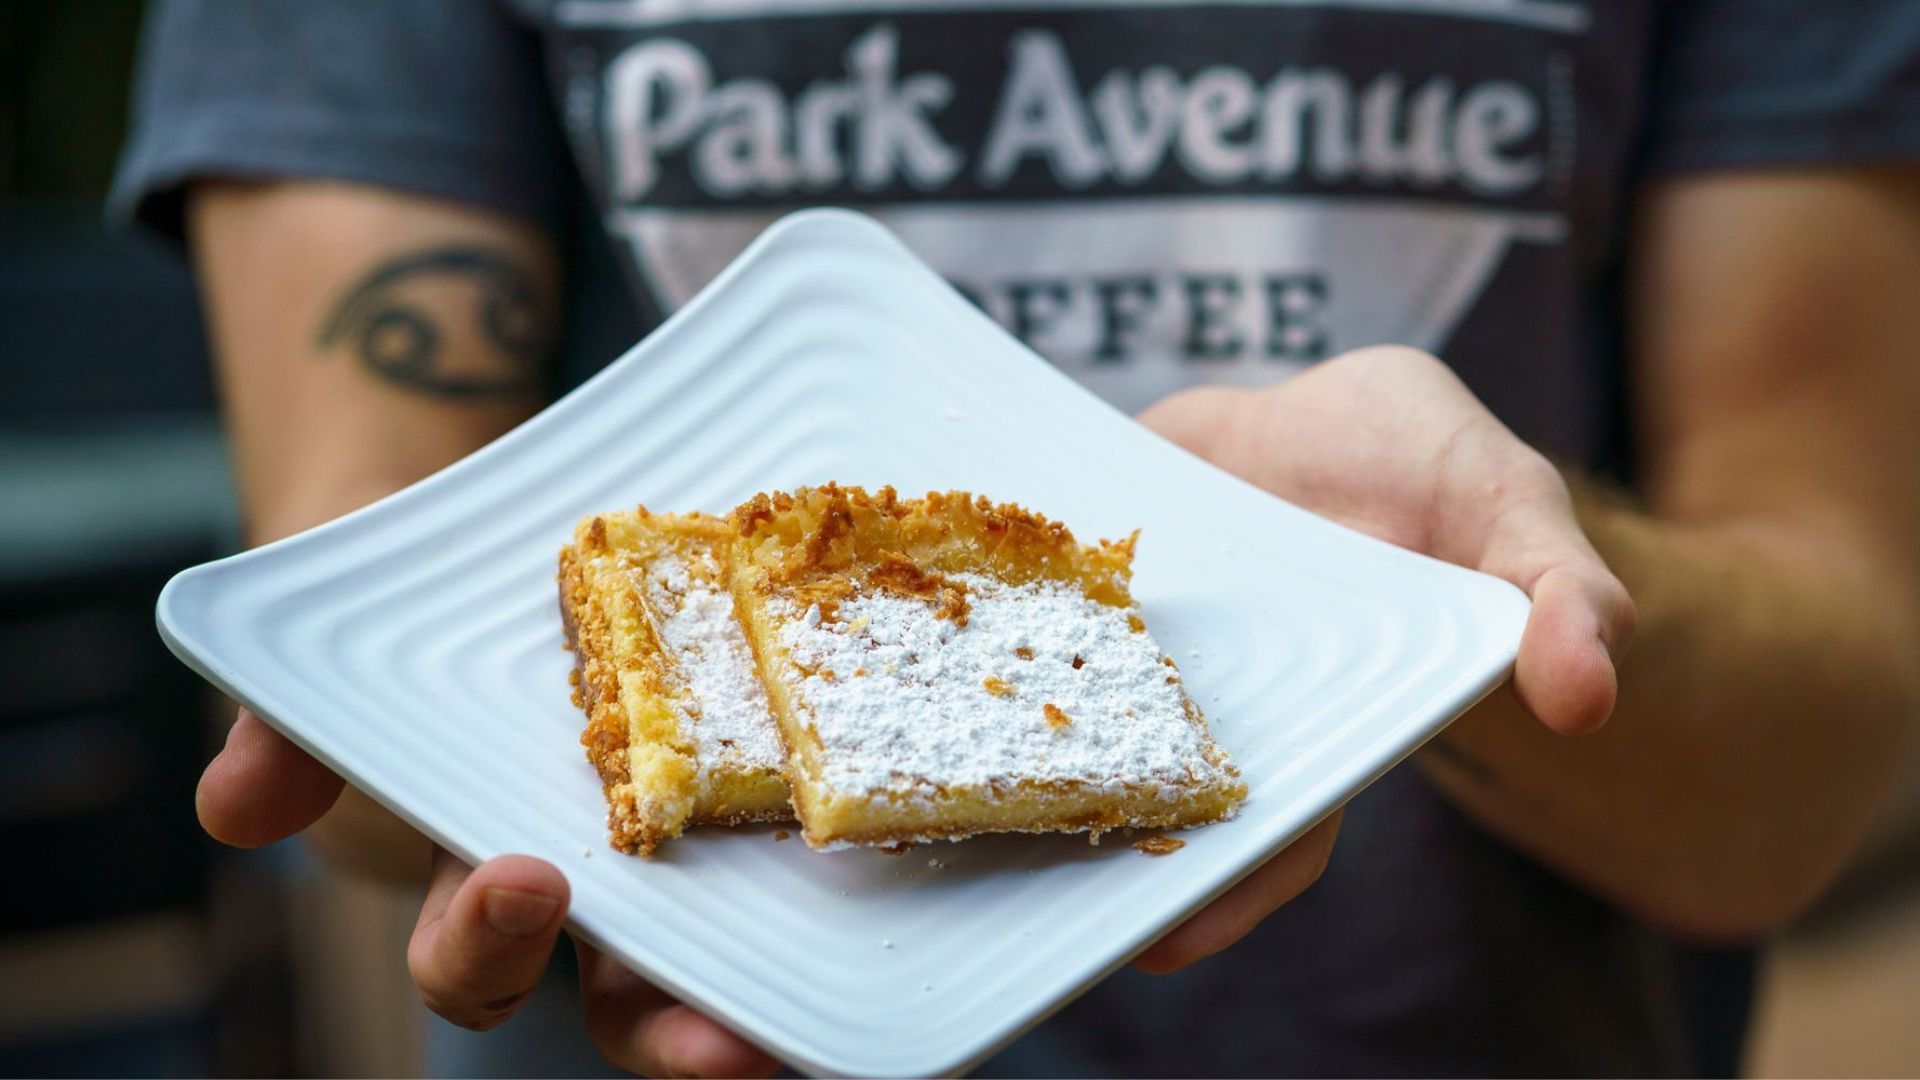 Rich, moist and tender, gooey butter cake is one of St. Louis' most emblematic eats.